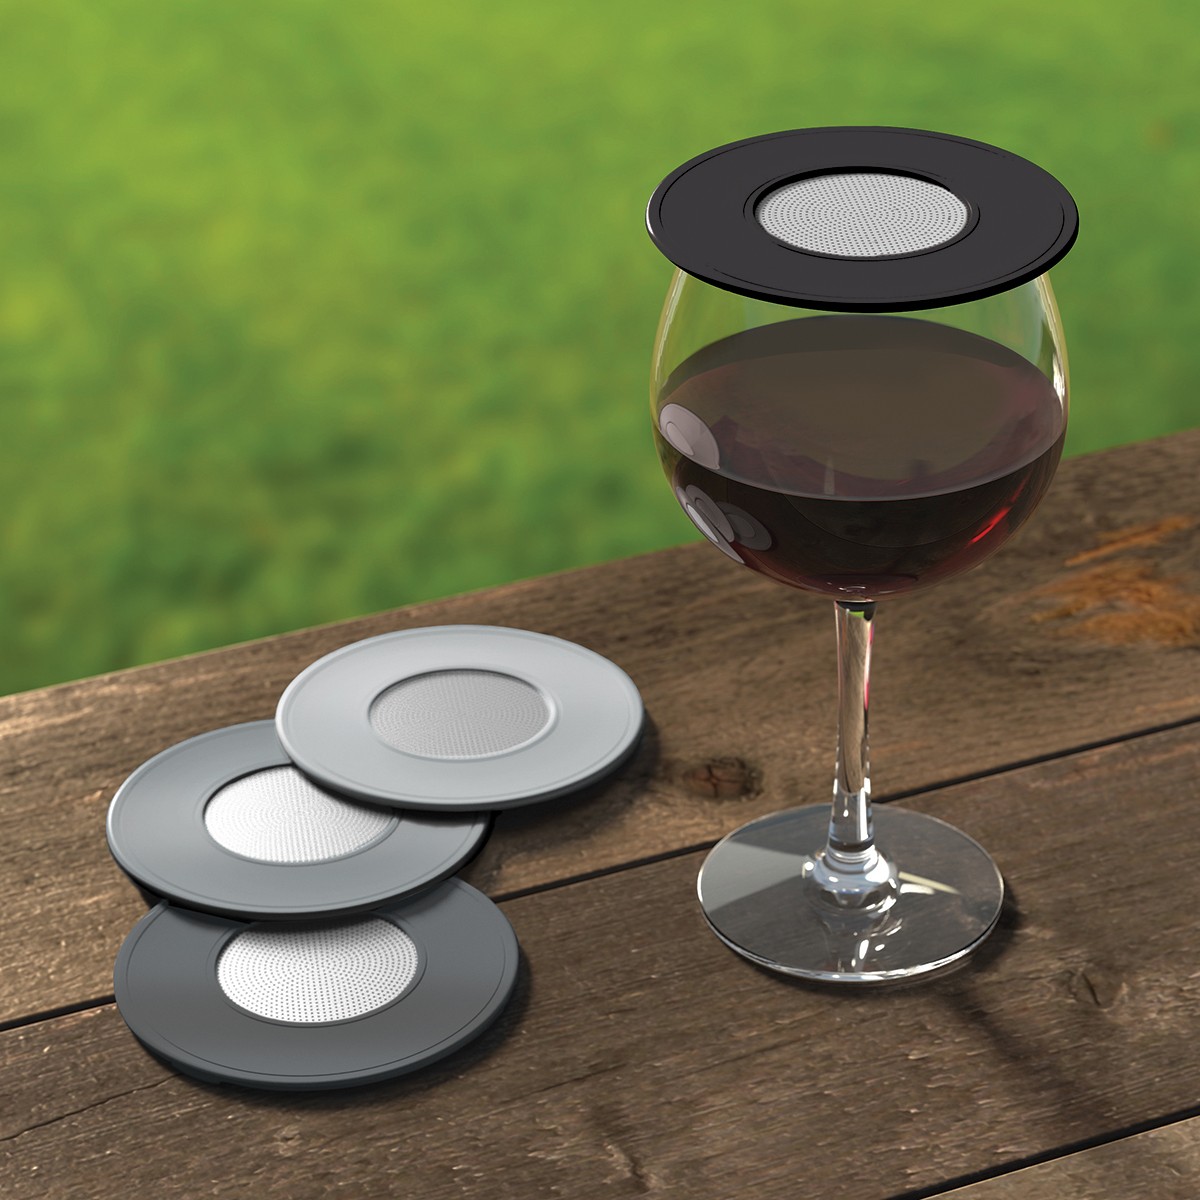 Drink Tops Ventilated Wine Glass Covers -Black & Gray - 4 Pack